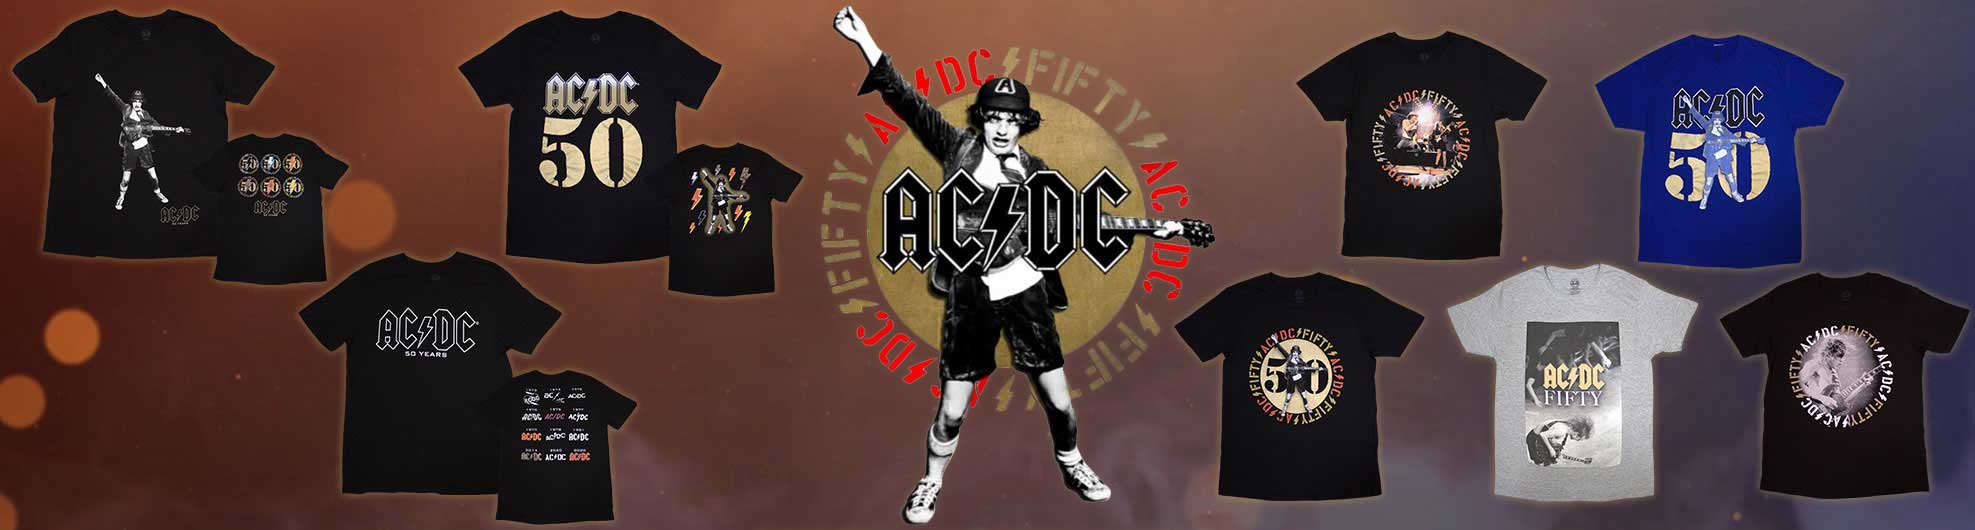 ACDC official music tees available